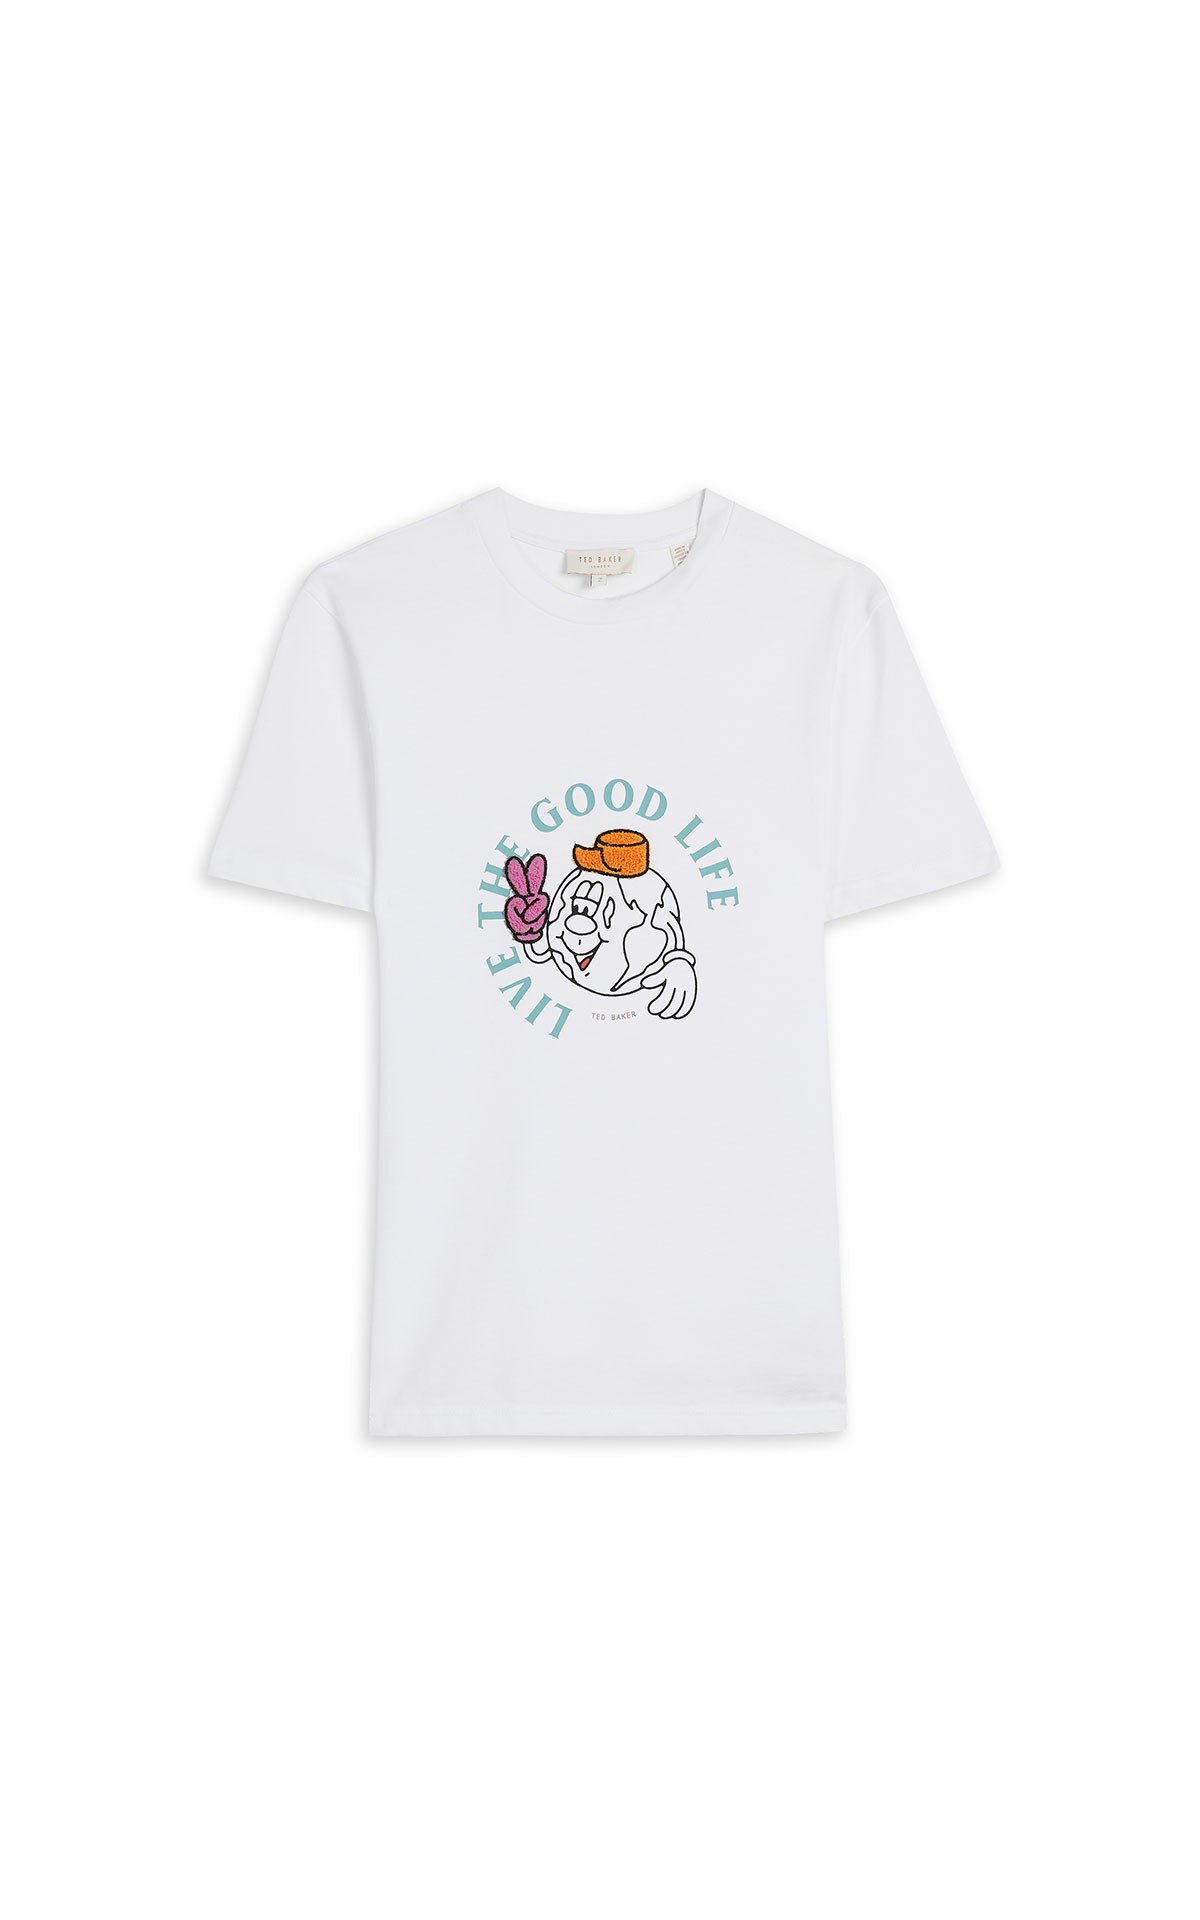 Ted Baker Good life graphic tee  from Bicester Village